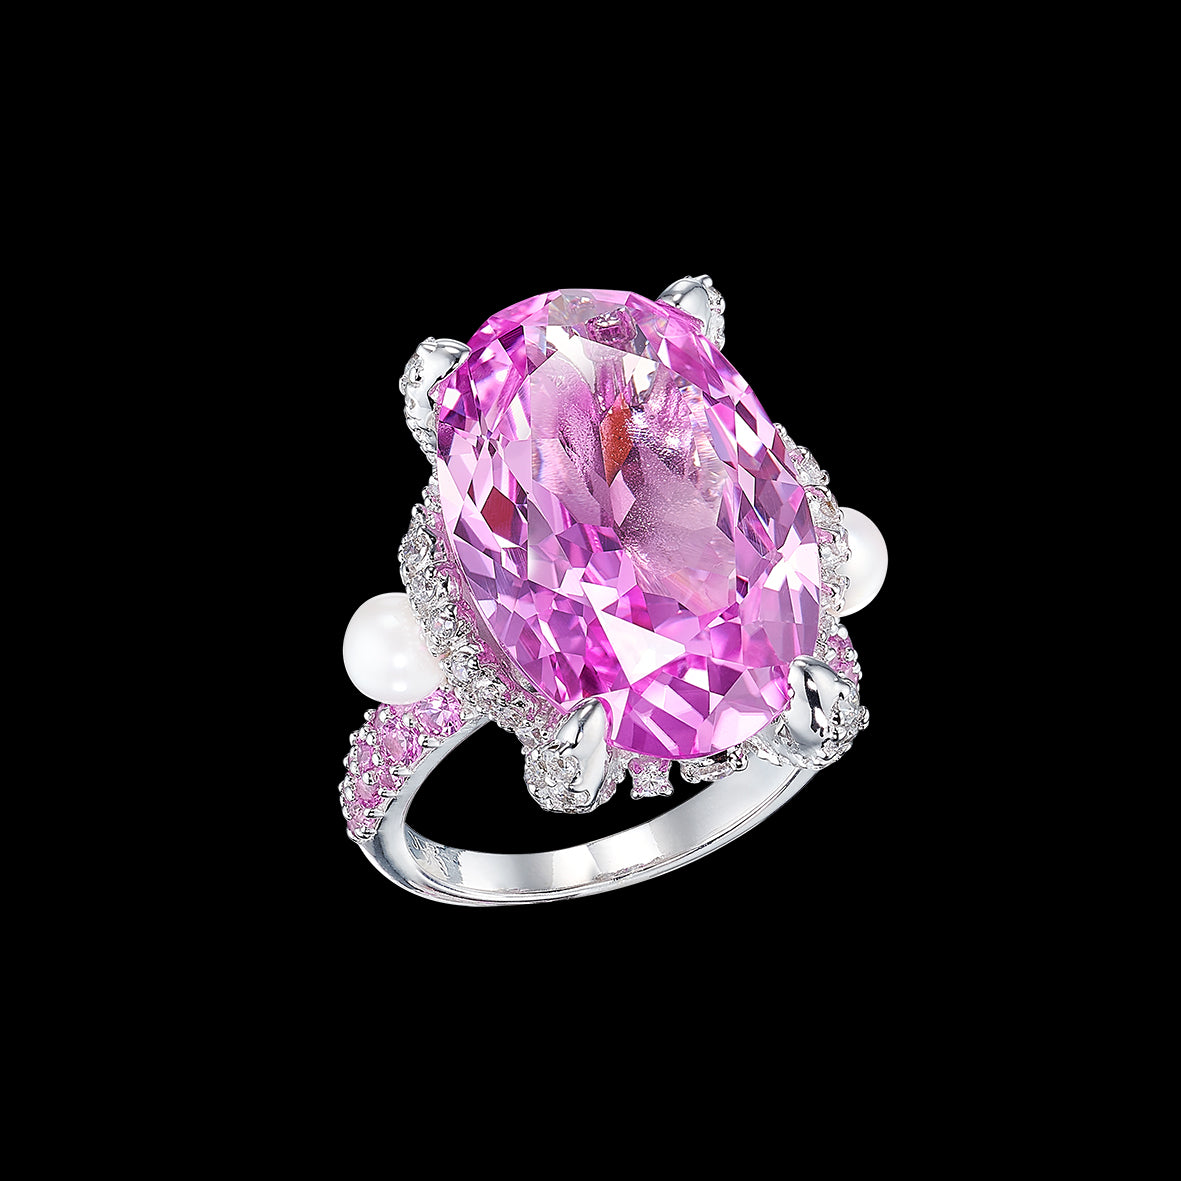 Pale Rose Mermaid Ring, Ring, Anabela Chan Joaillerie - Fine jewelry with laboratory grown and created gemstones hand-crafted in the United Kingdom. Anabela Chan Joaillerie is the first fine jewellery brand in the world to champion laboratory-grown and created gemstones with high jewellery design, artisanal craftsmanship and a focus on ethical and sustainable innovations.